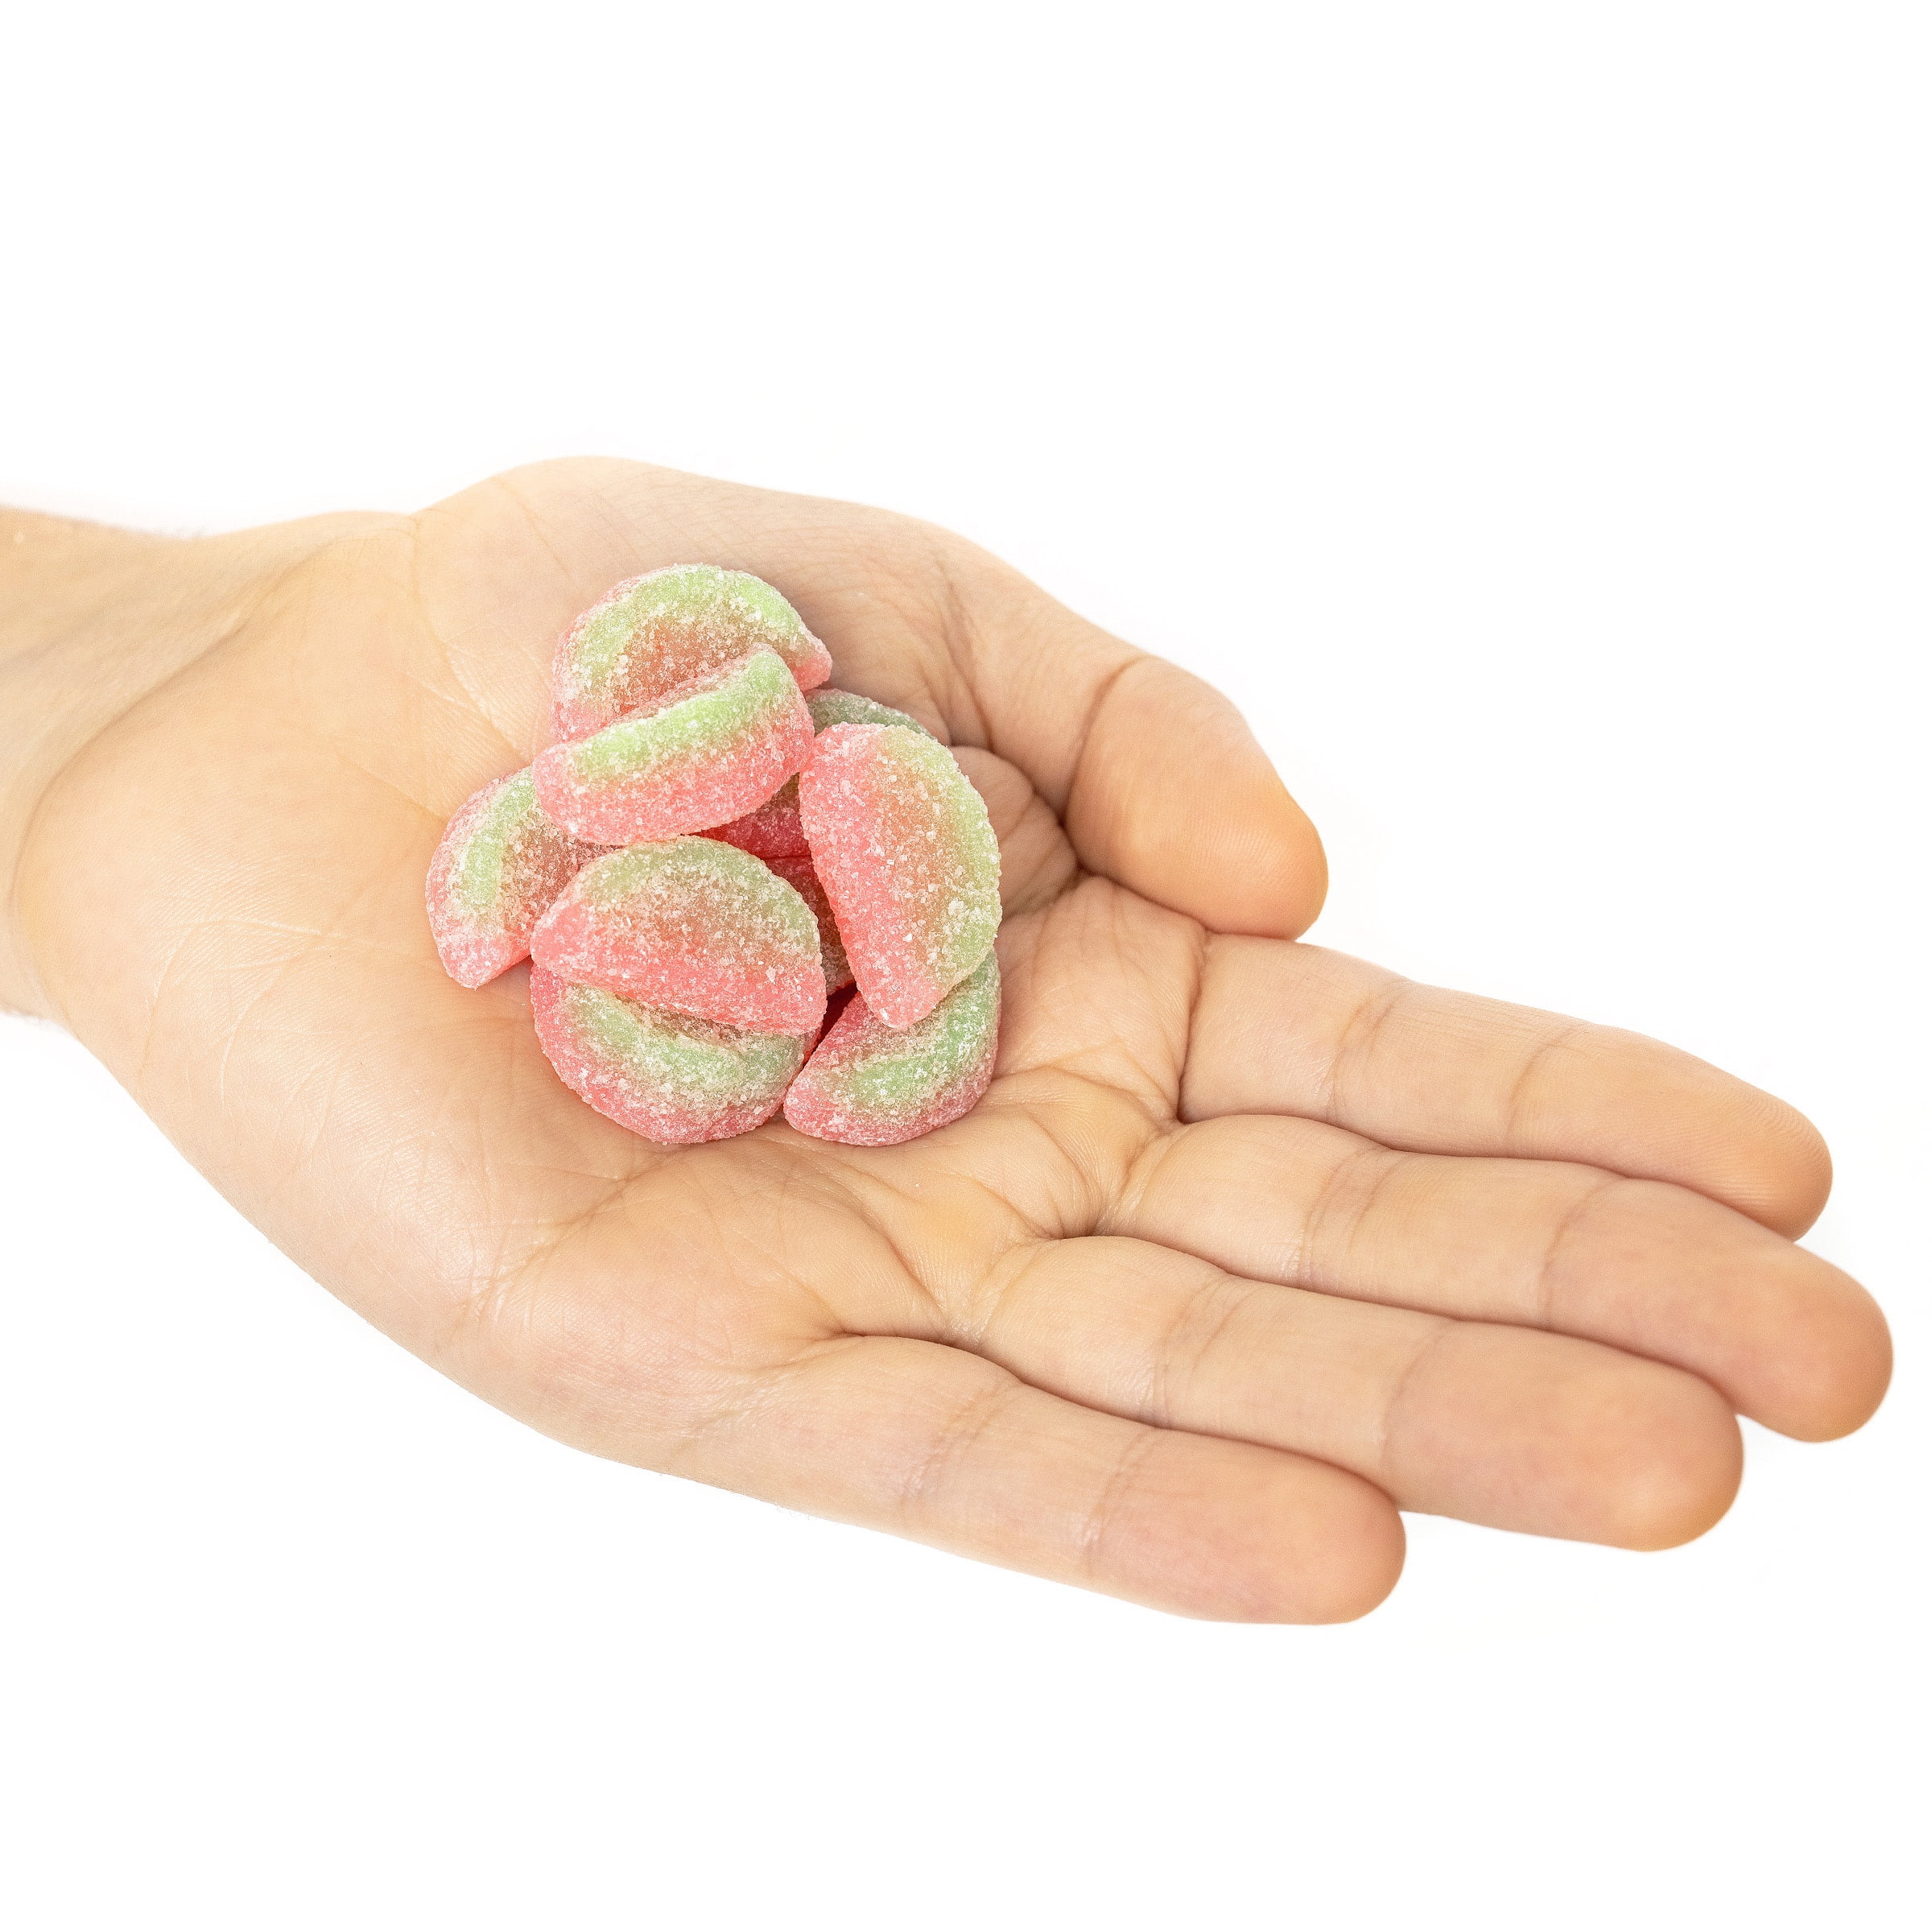 Sour Patch Kids Watermelon Soft Chewy Candy 8 oz And .5 oz Sour Patch Kids